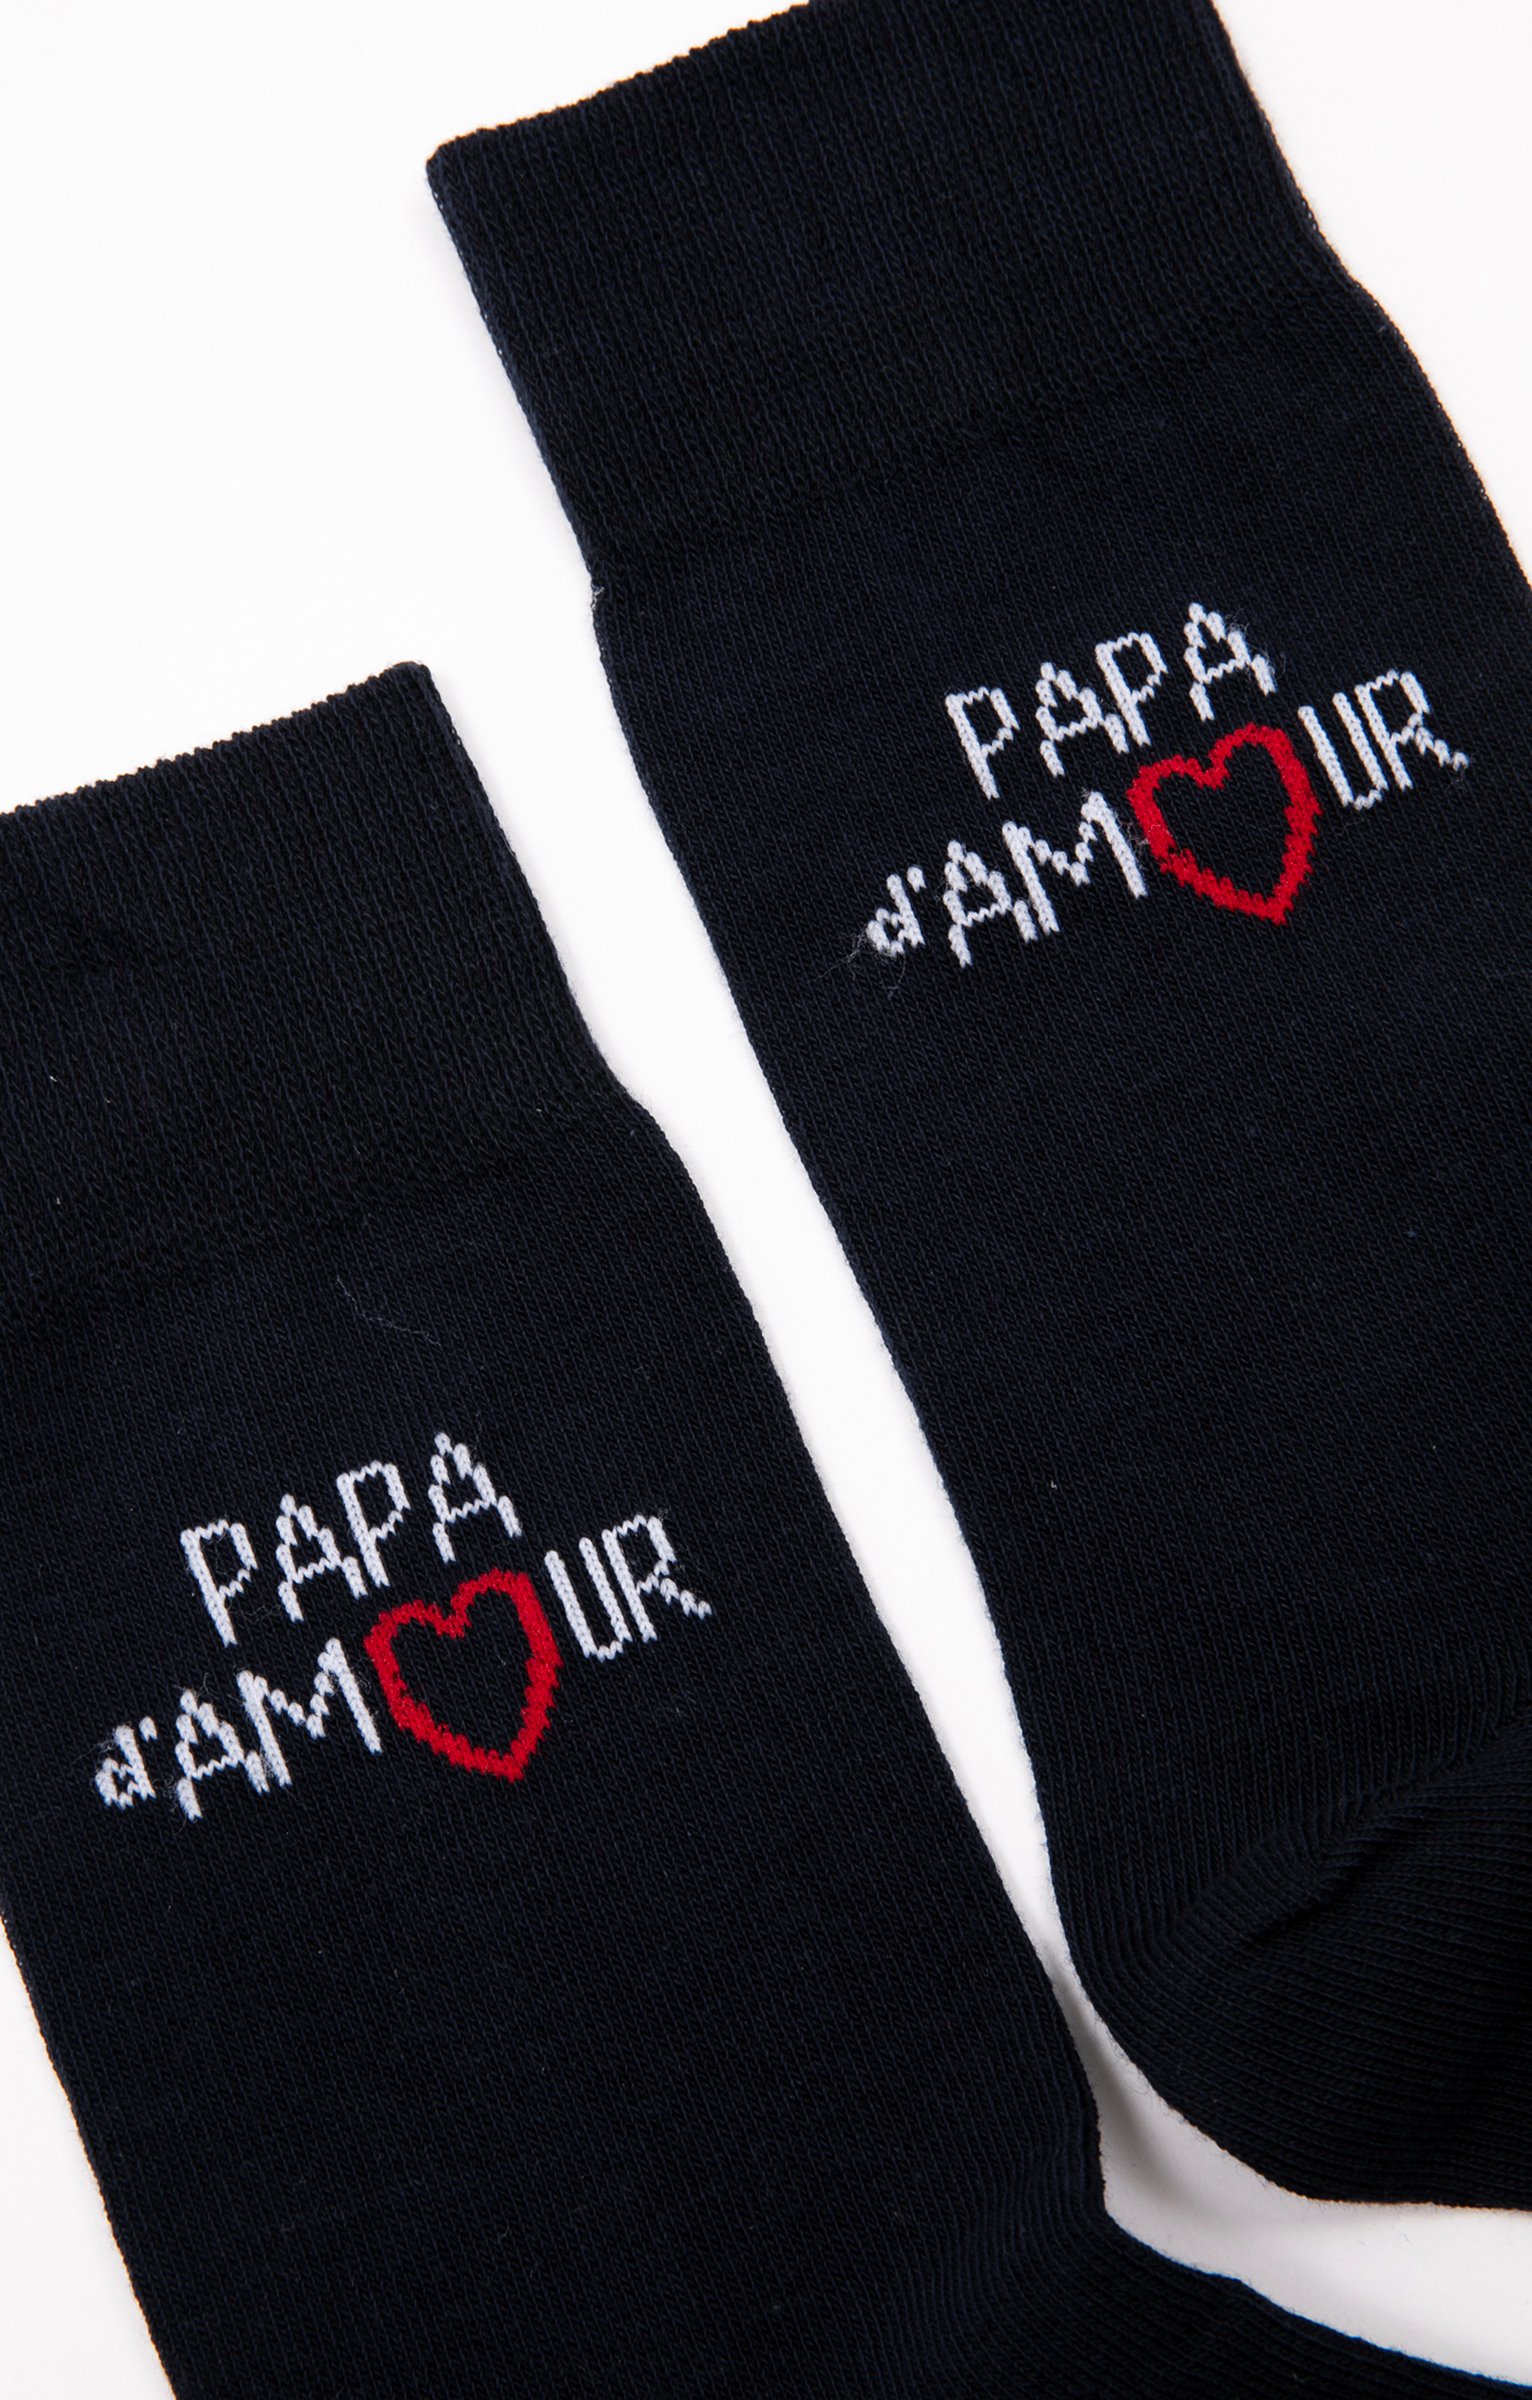 Chaussettes papa d'amour - 3,19€ - Armand Thiery